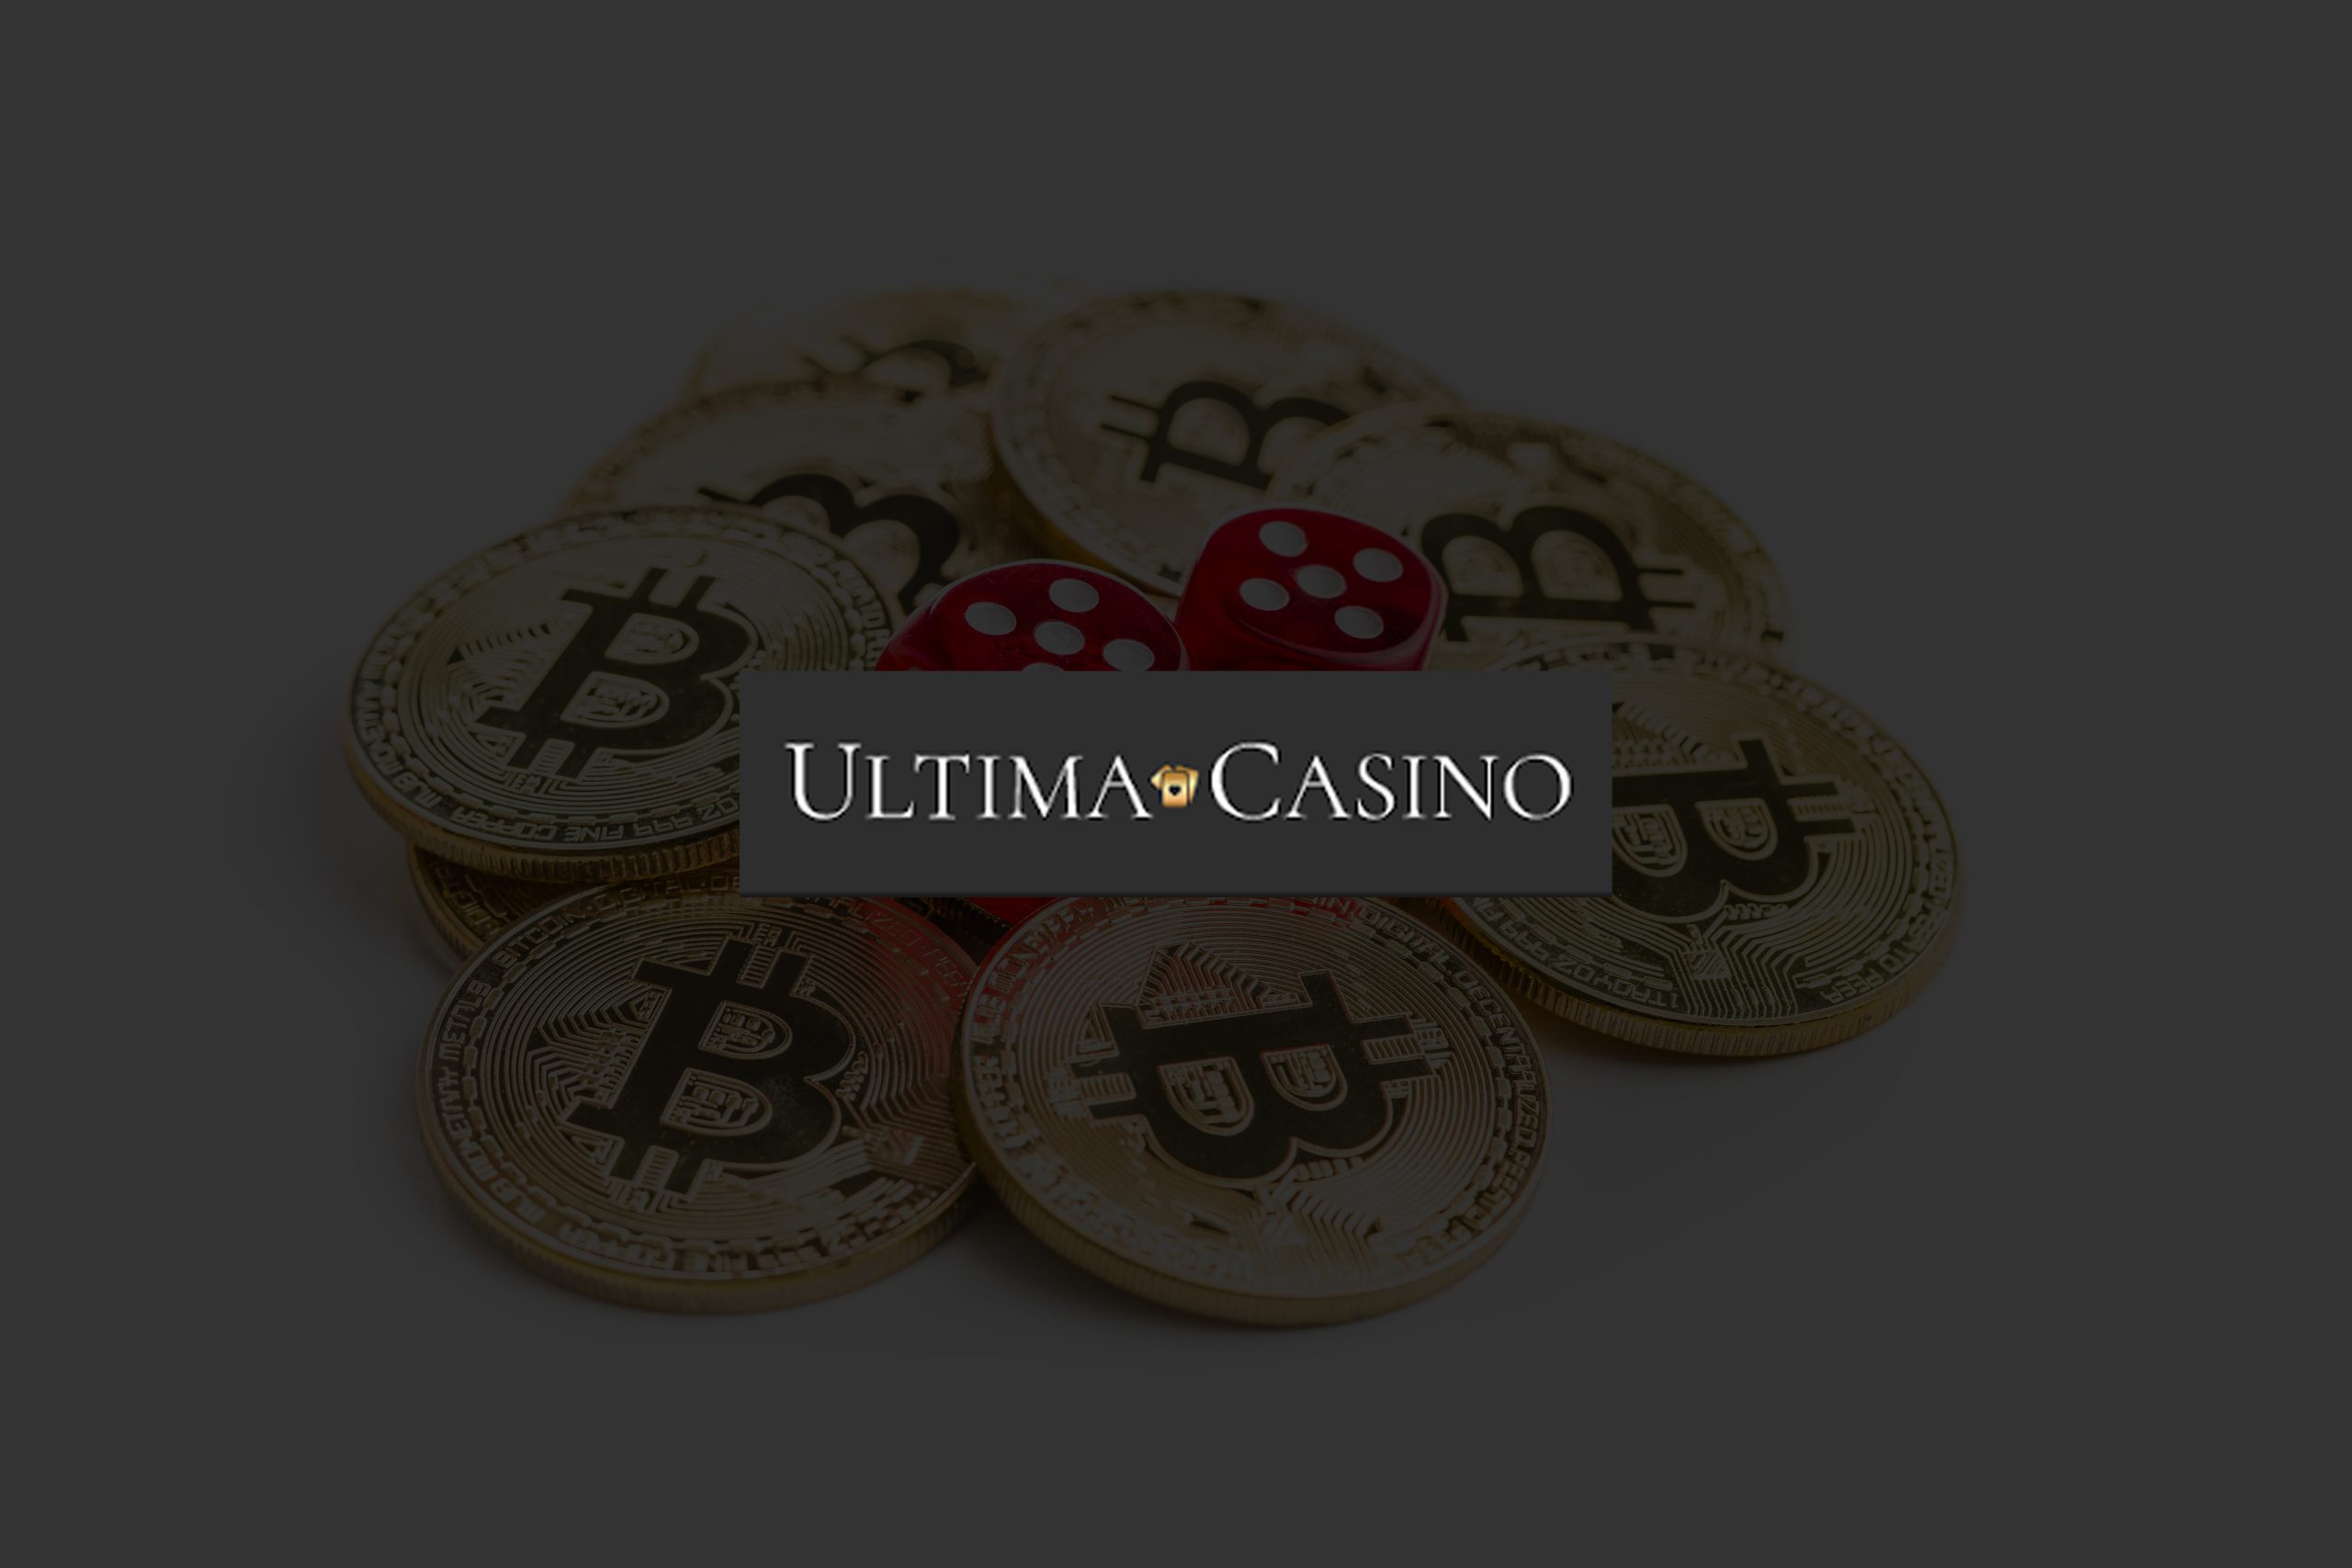 Is Cryptocurrency in Ultima Casino Not On Gamstop?